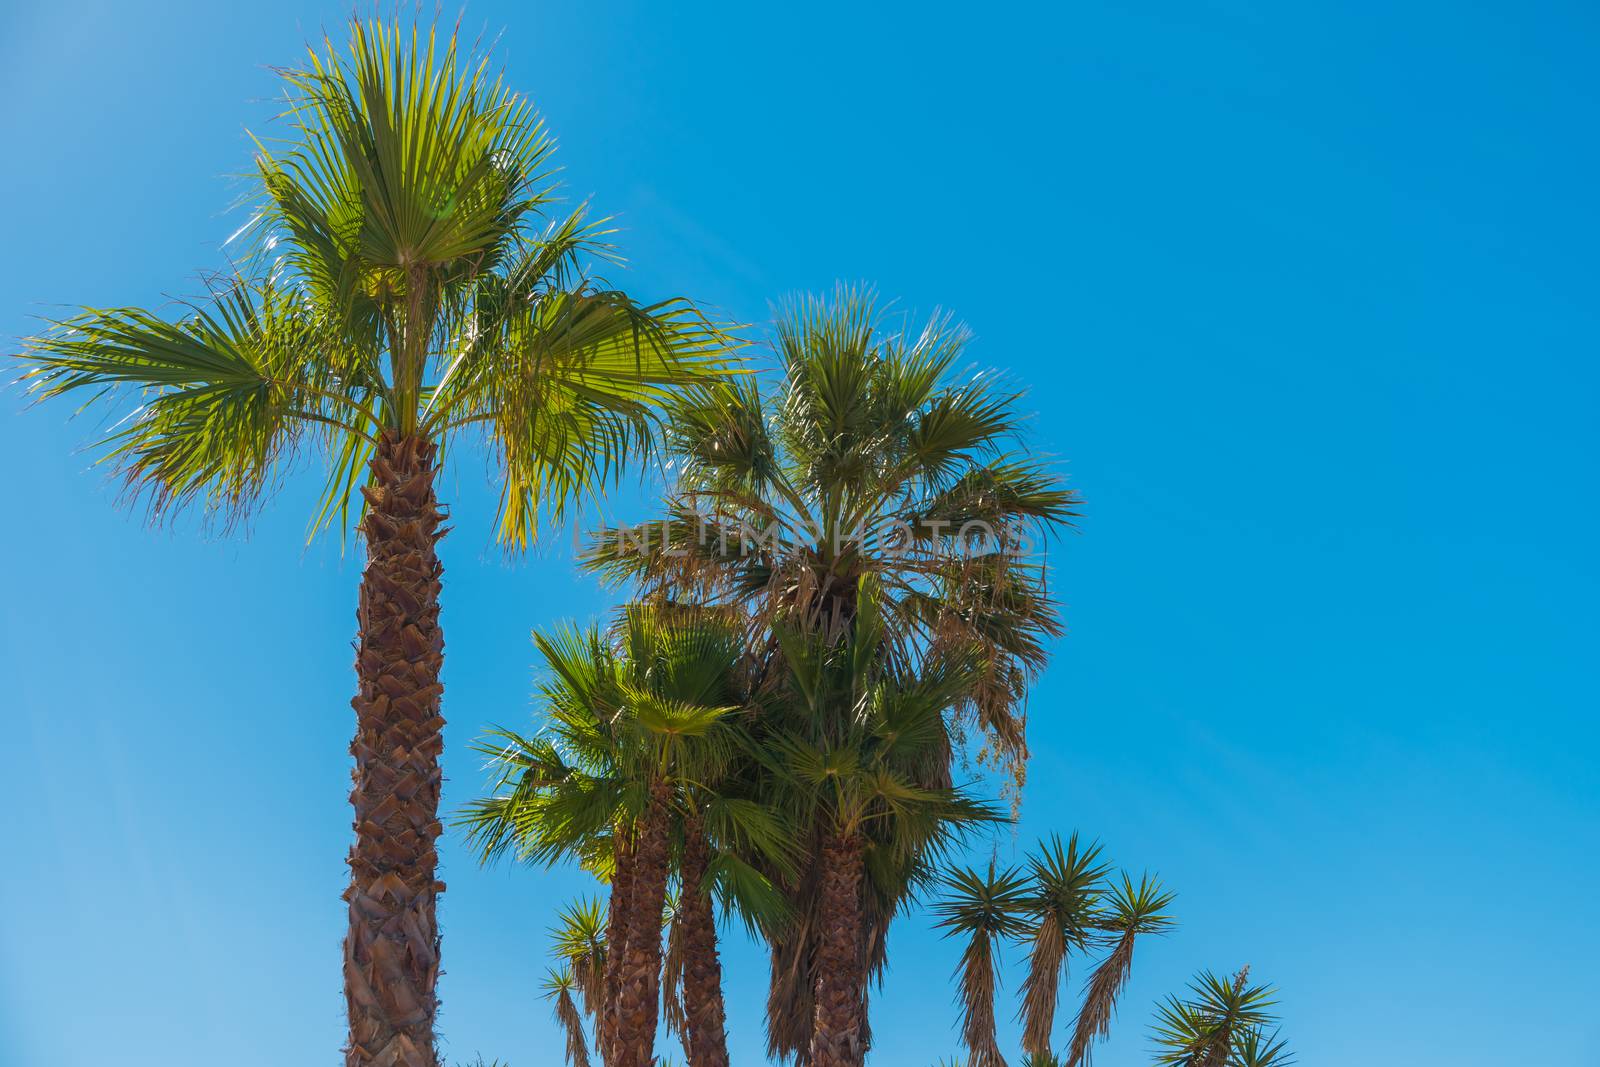 Amazing palm trees in the blue sunny sky. Tropical background by AnaMarques